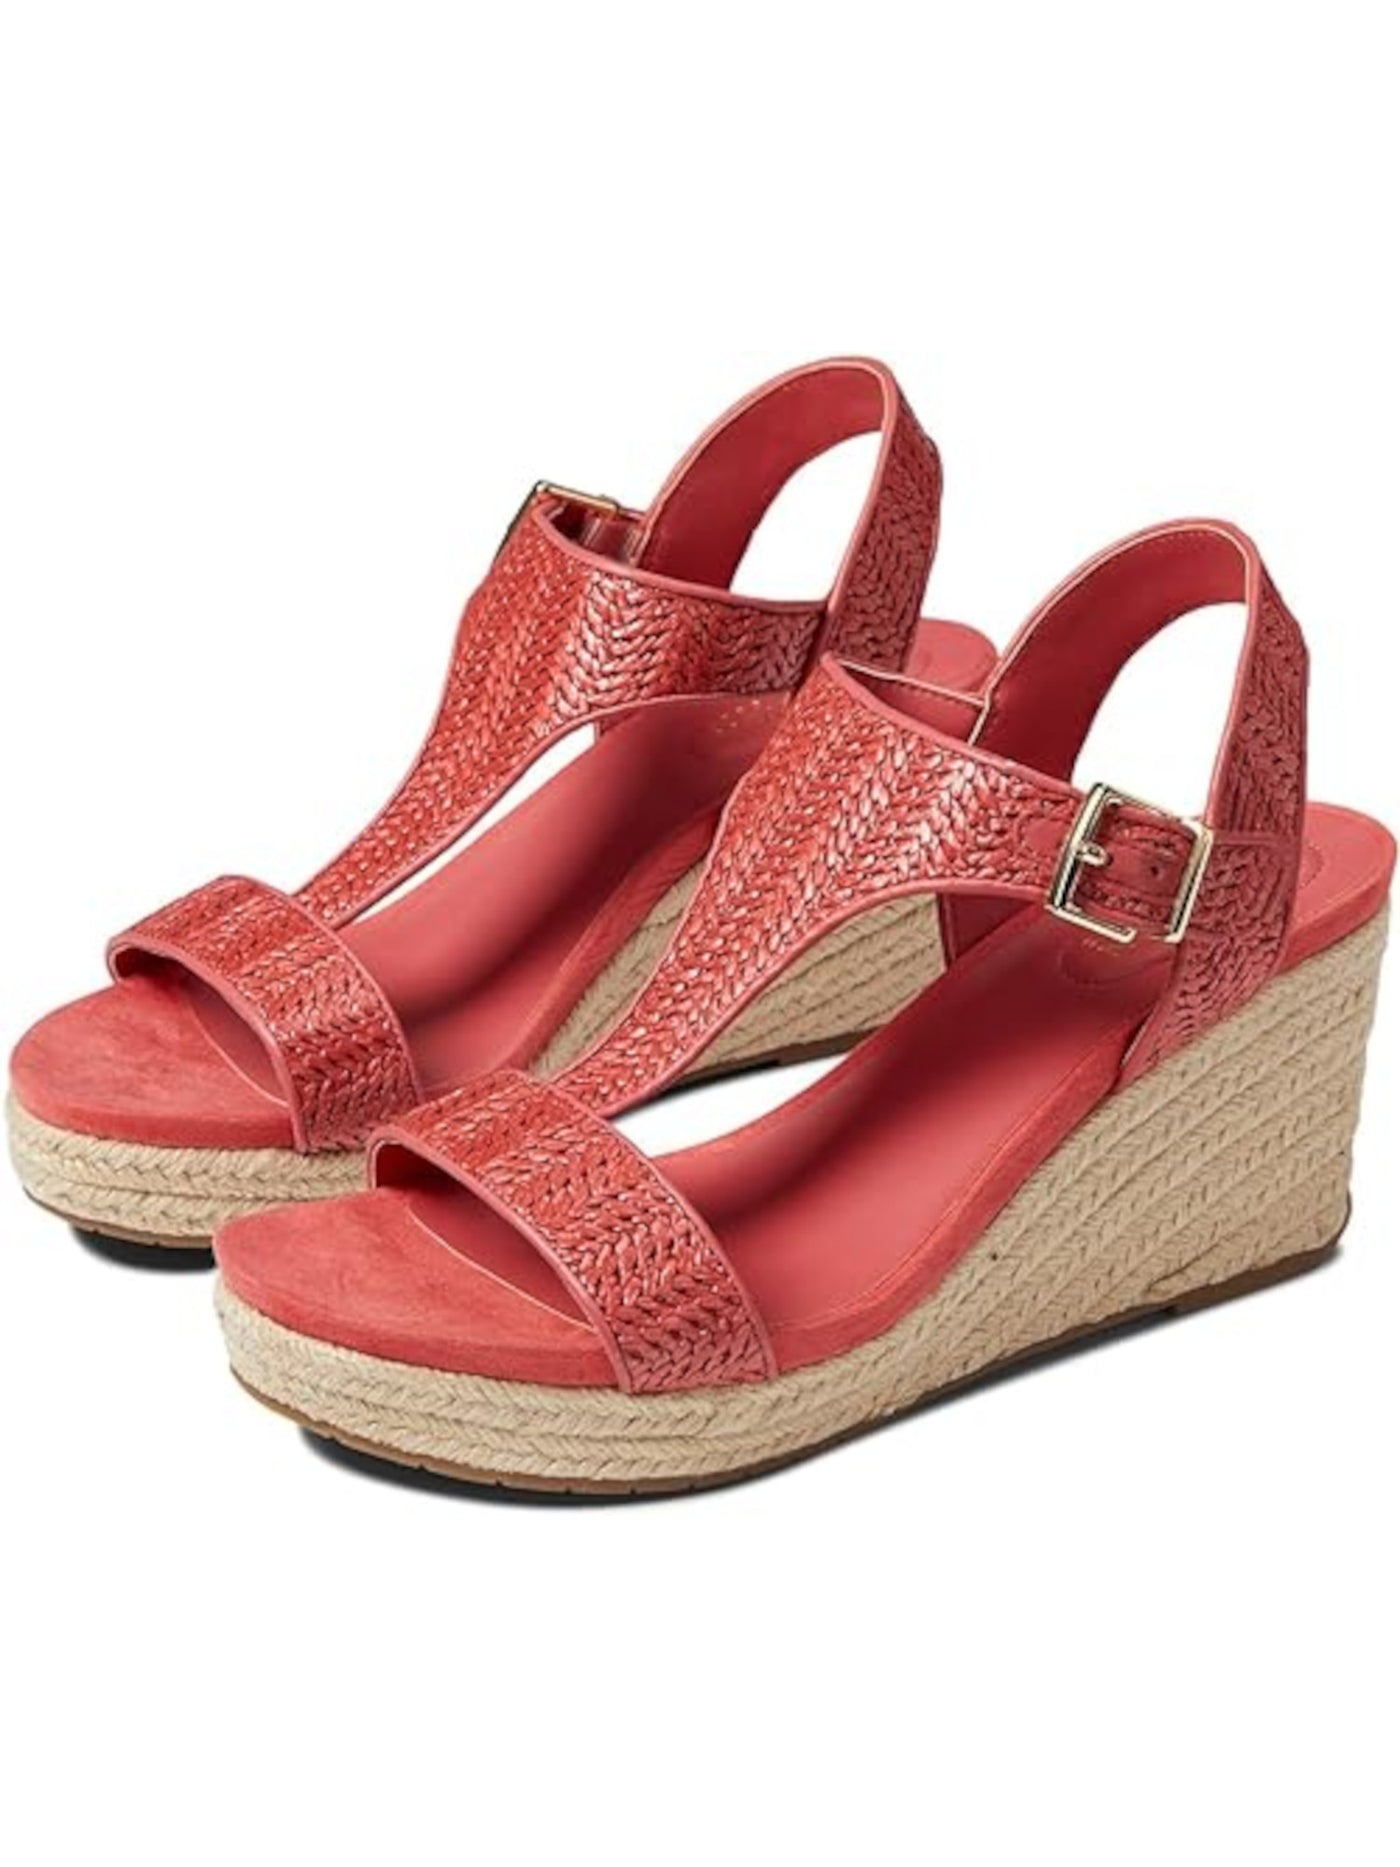 REACTION KENNETH COLE Womens Coral Woven Adjustable Card Round Toe Wedge Buckle Espadrille Shoes 8.5